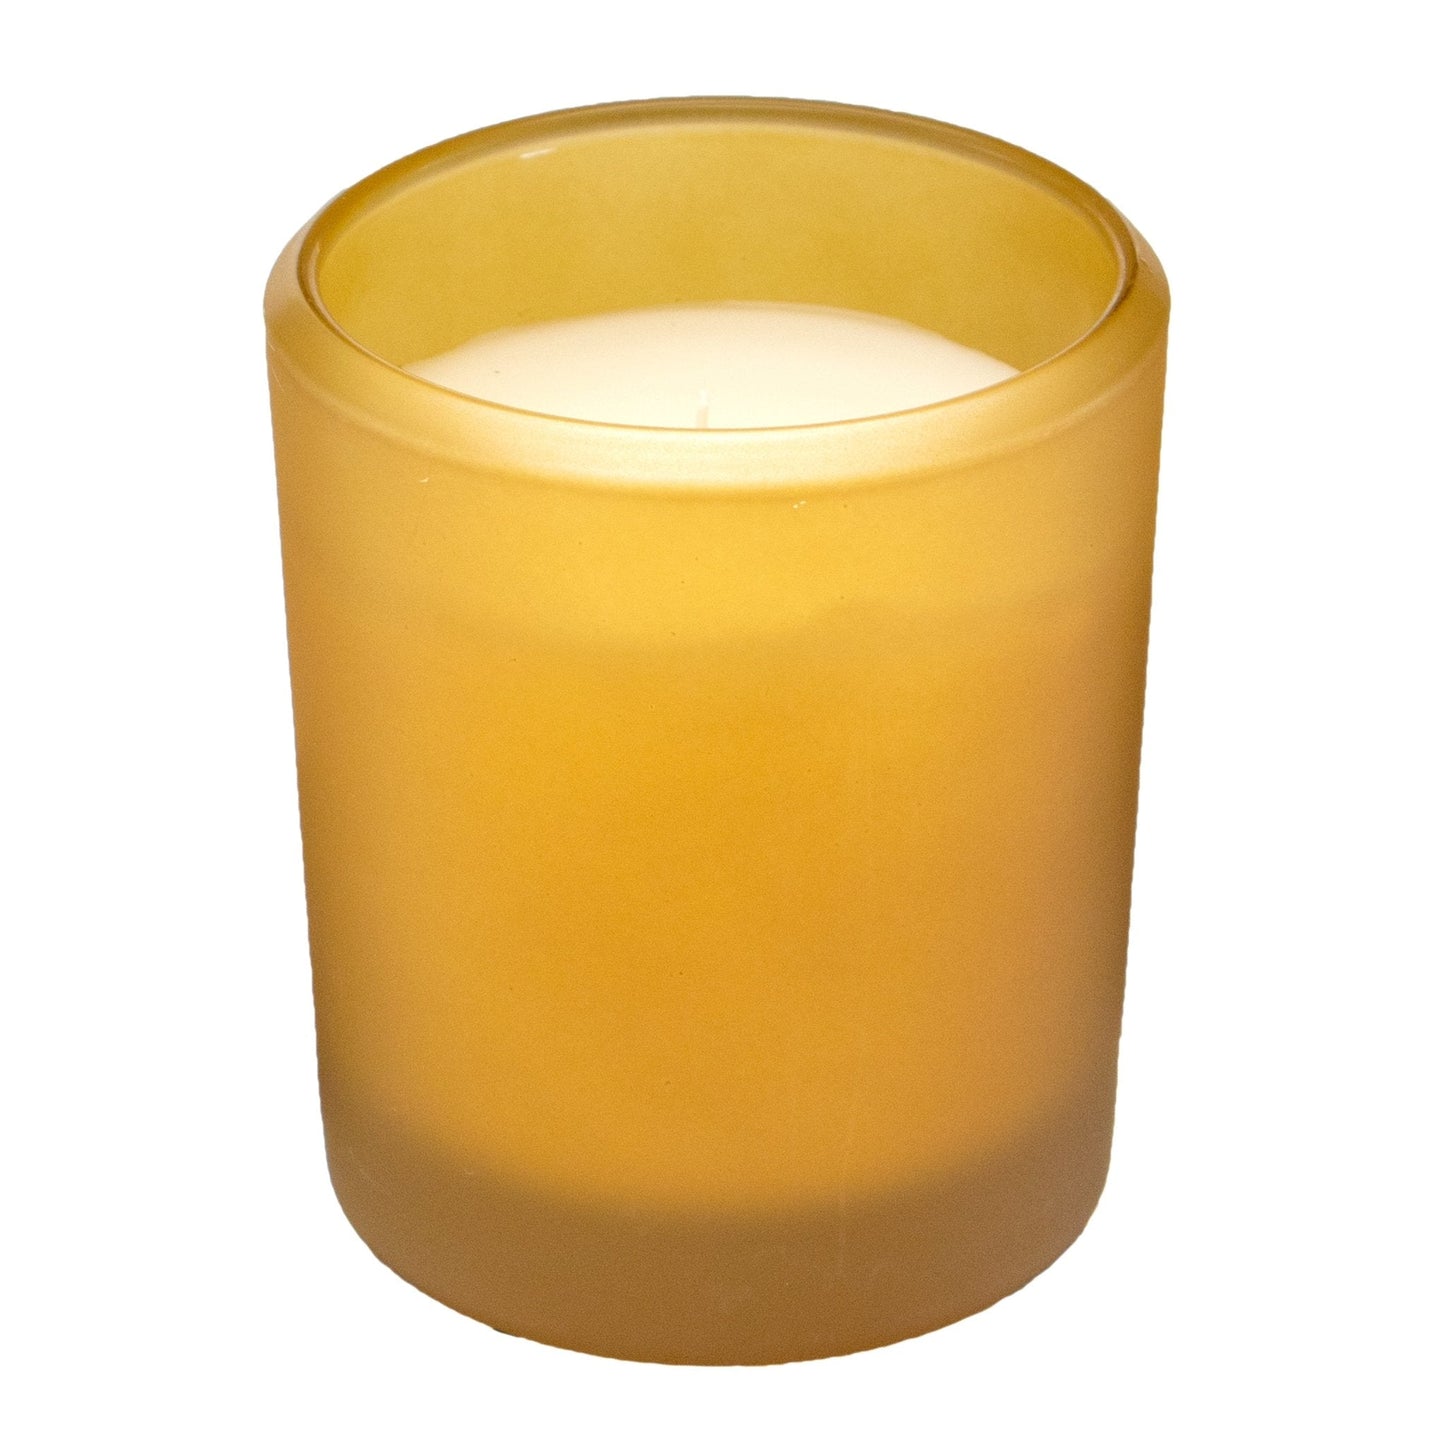 Pier 1 Apple Cider Boxed 8oz Soy Candle - Pier 1